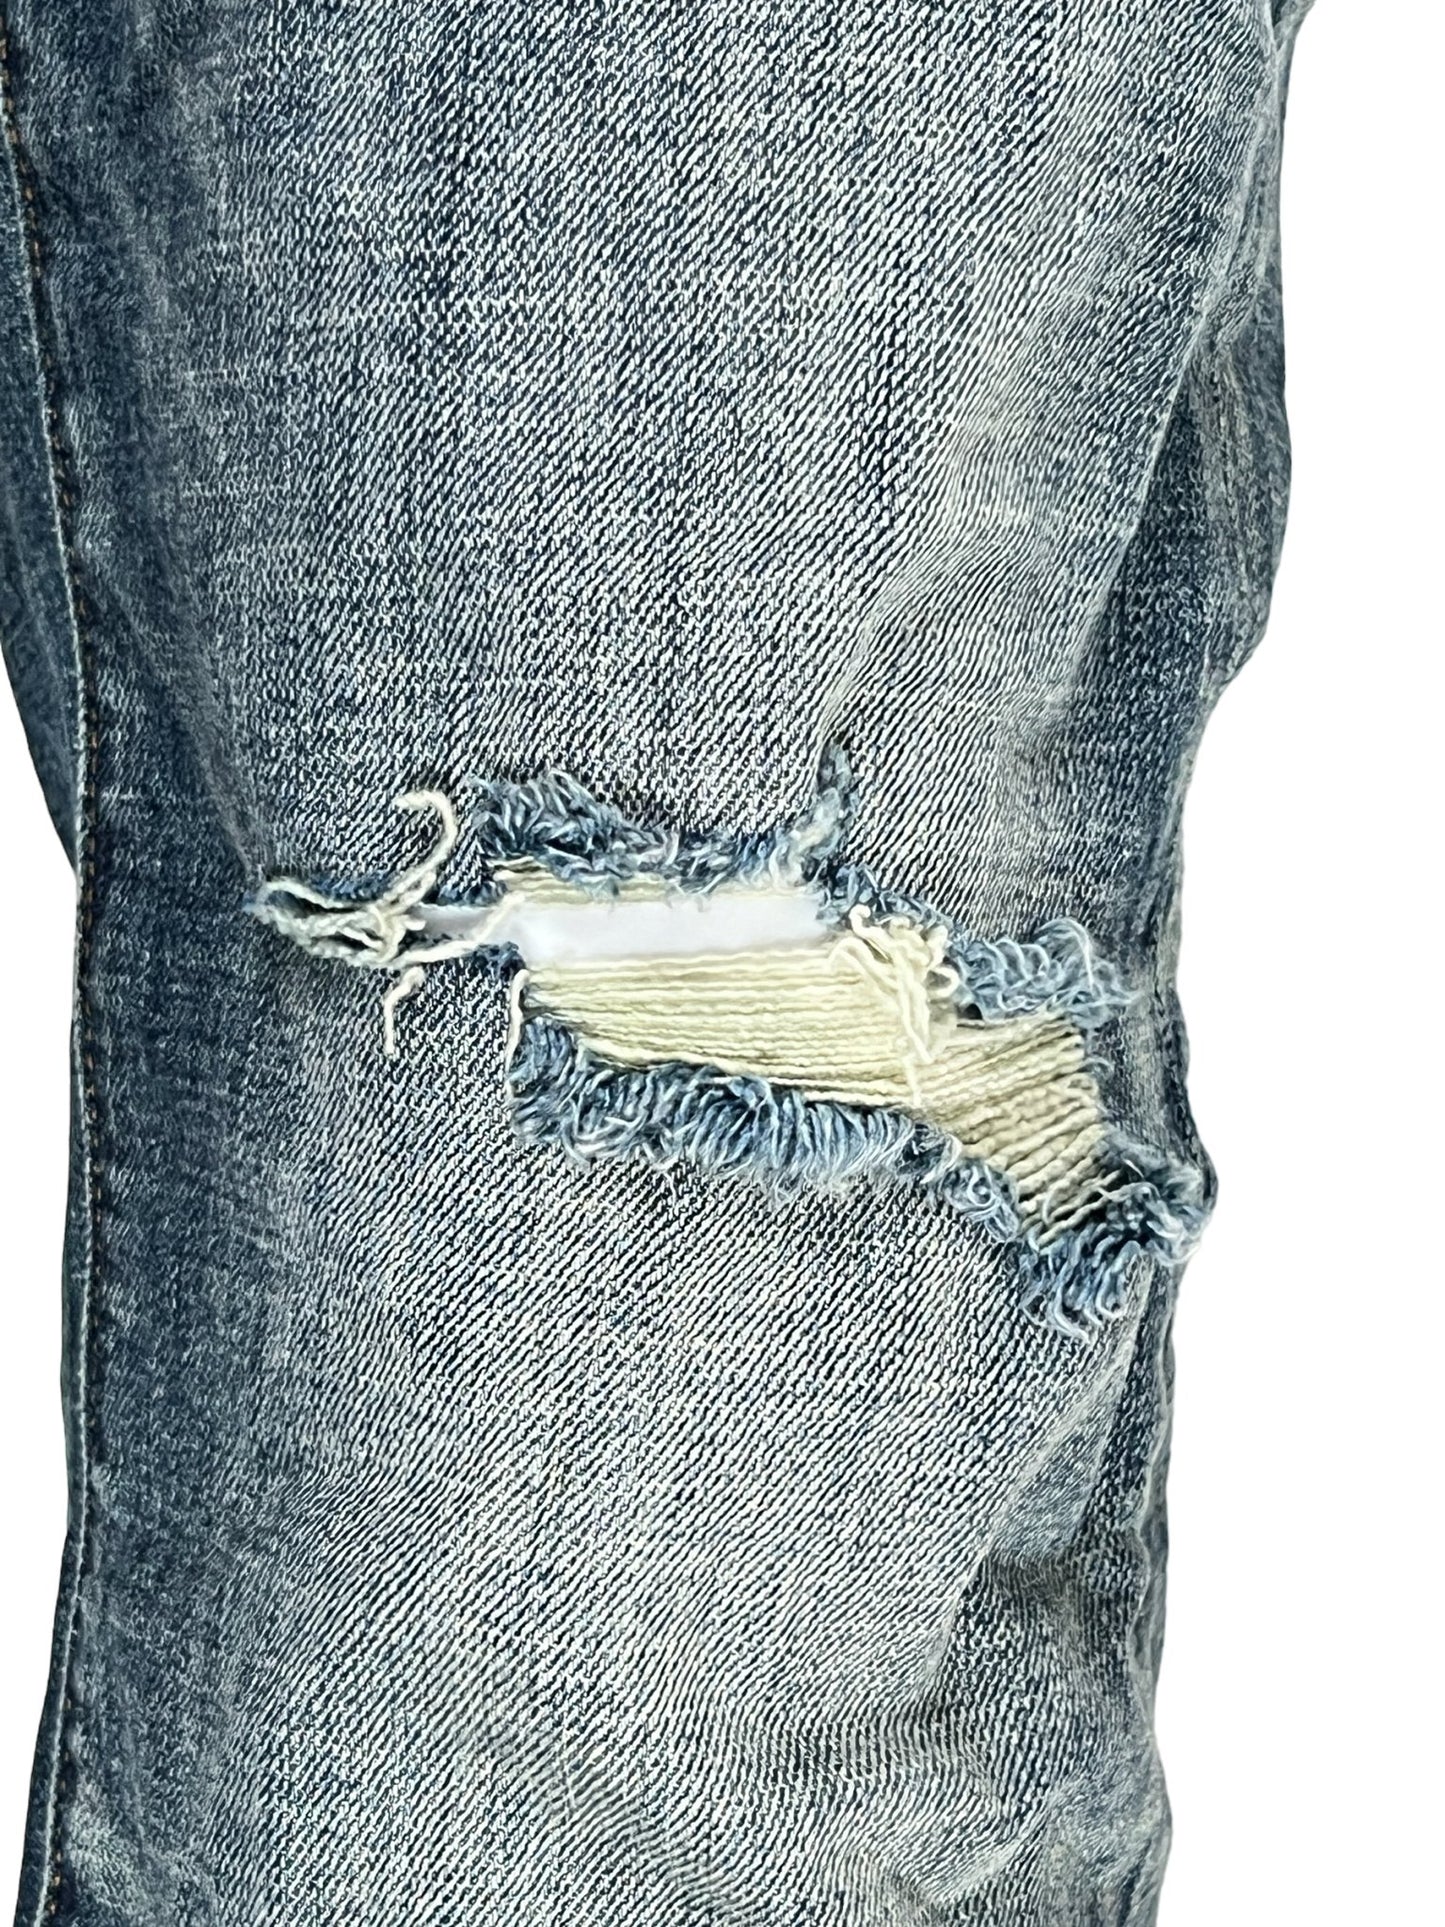 A close-up of a pair of torn PURPLE BRAND jeans with a 1-year fade flare.